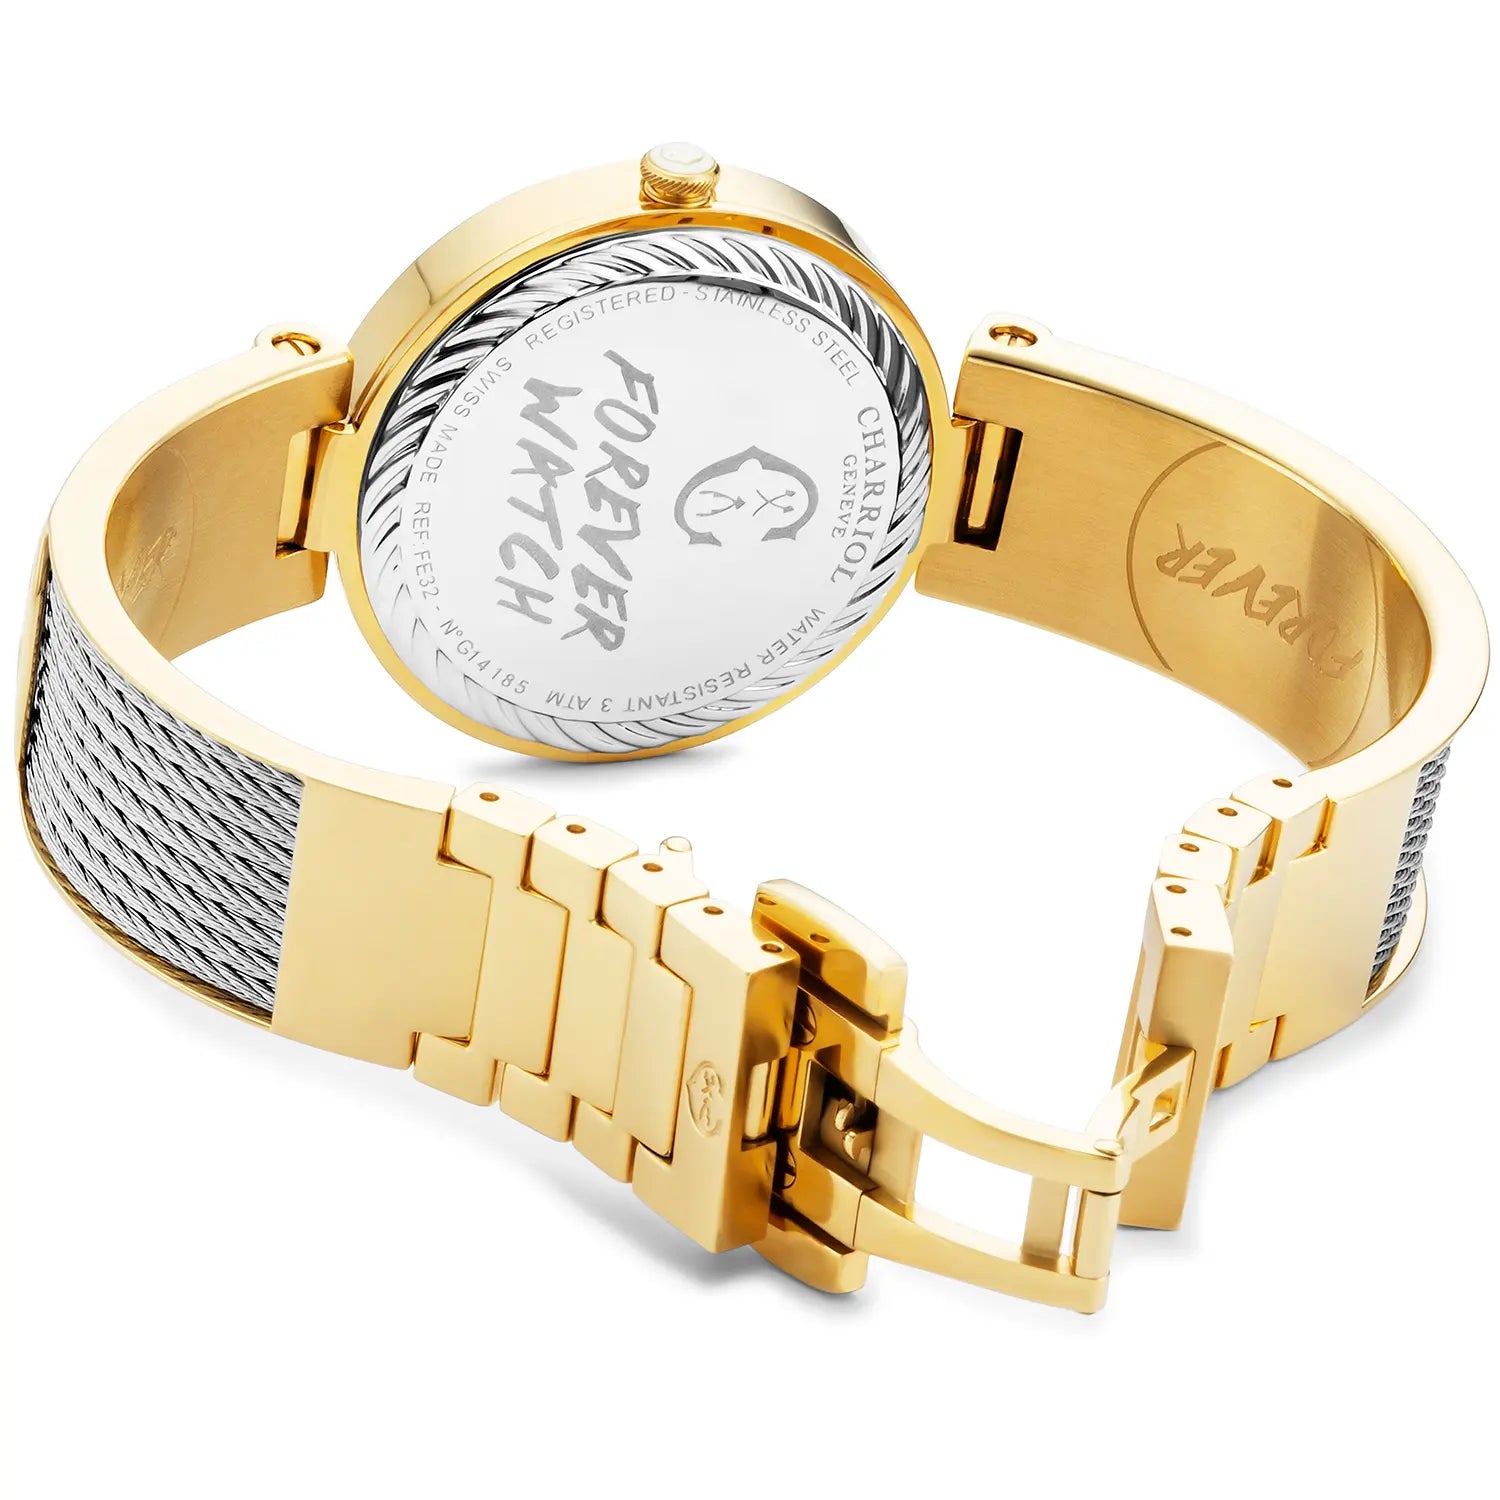 FOREVER, 32MM, QUARTZ CALIBRE, MOTHER-OF-PEARL DIAL, YELLOW GOLD PVD BEZEL, STEEL CABLE BRACELET - Charriol Geneve -  Watch